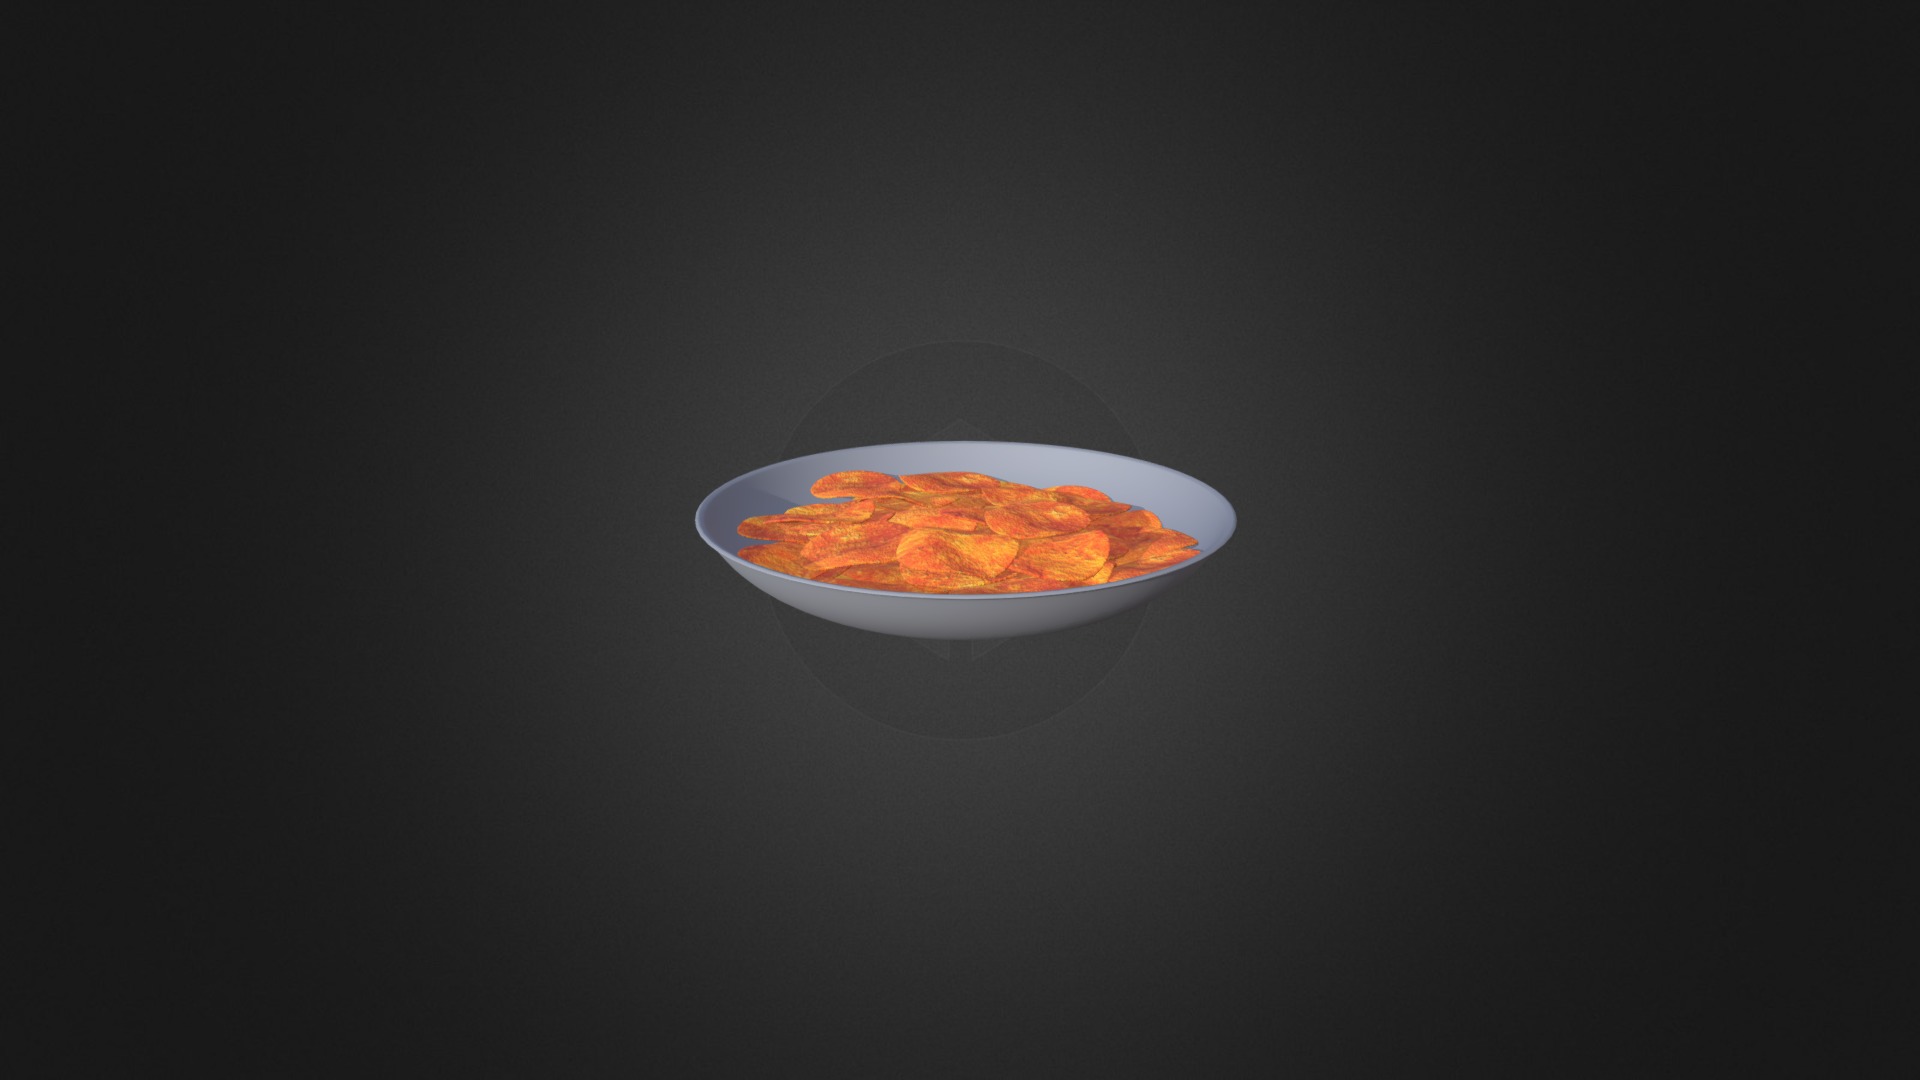 3D model Chips - This is a 3D model of the Chips. The 3D model is about a bowl of orange liquid.